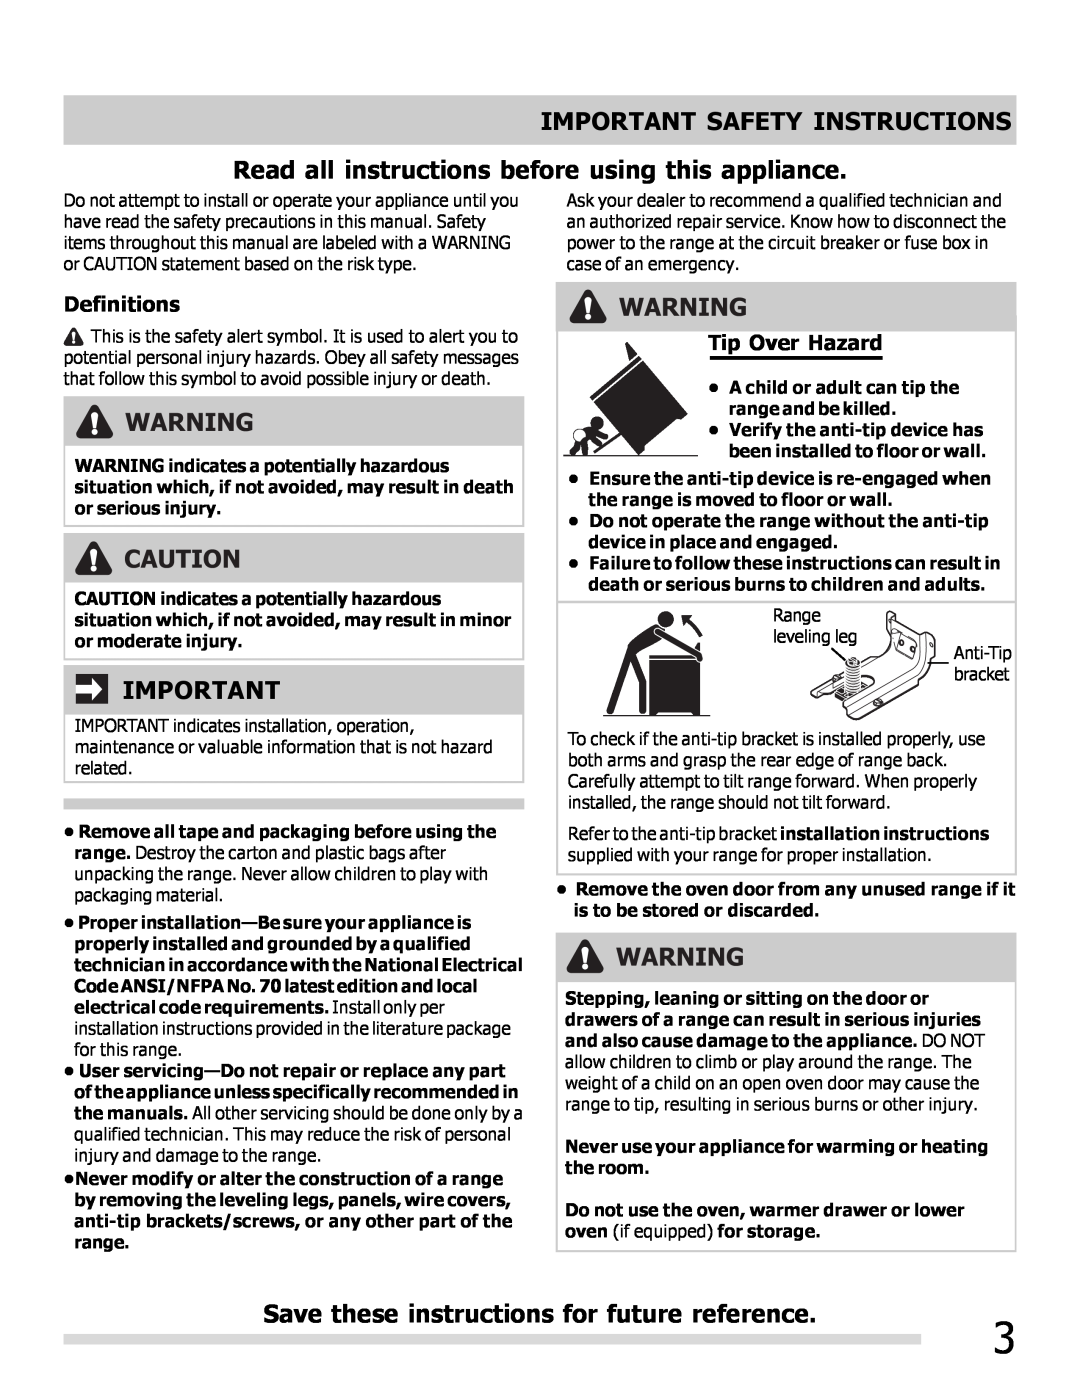 Frigidaire 316902202 Important Safety Instructions, Read all instructions before using this appliance, Definitions 